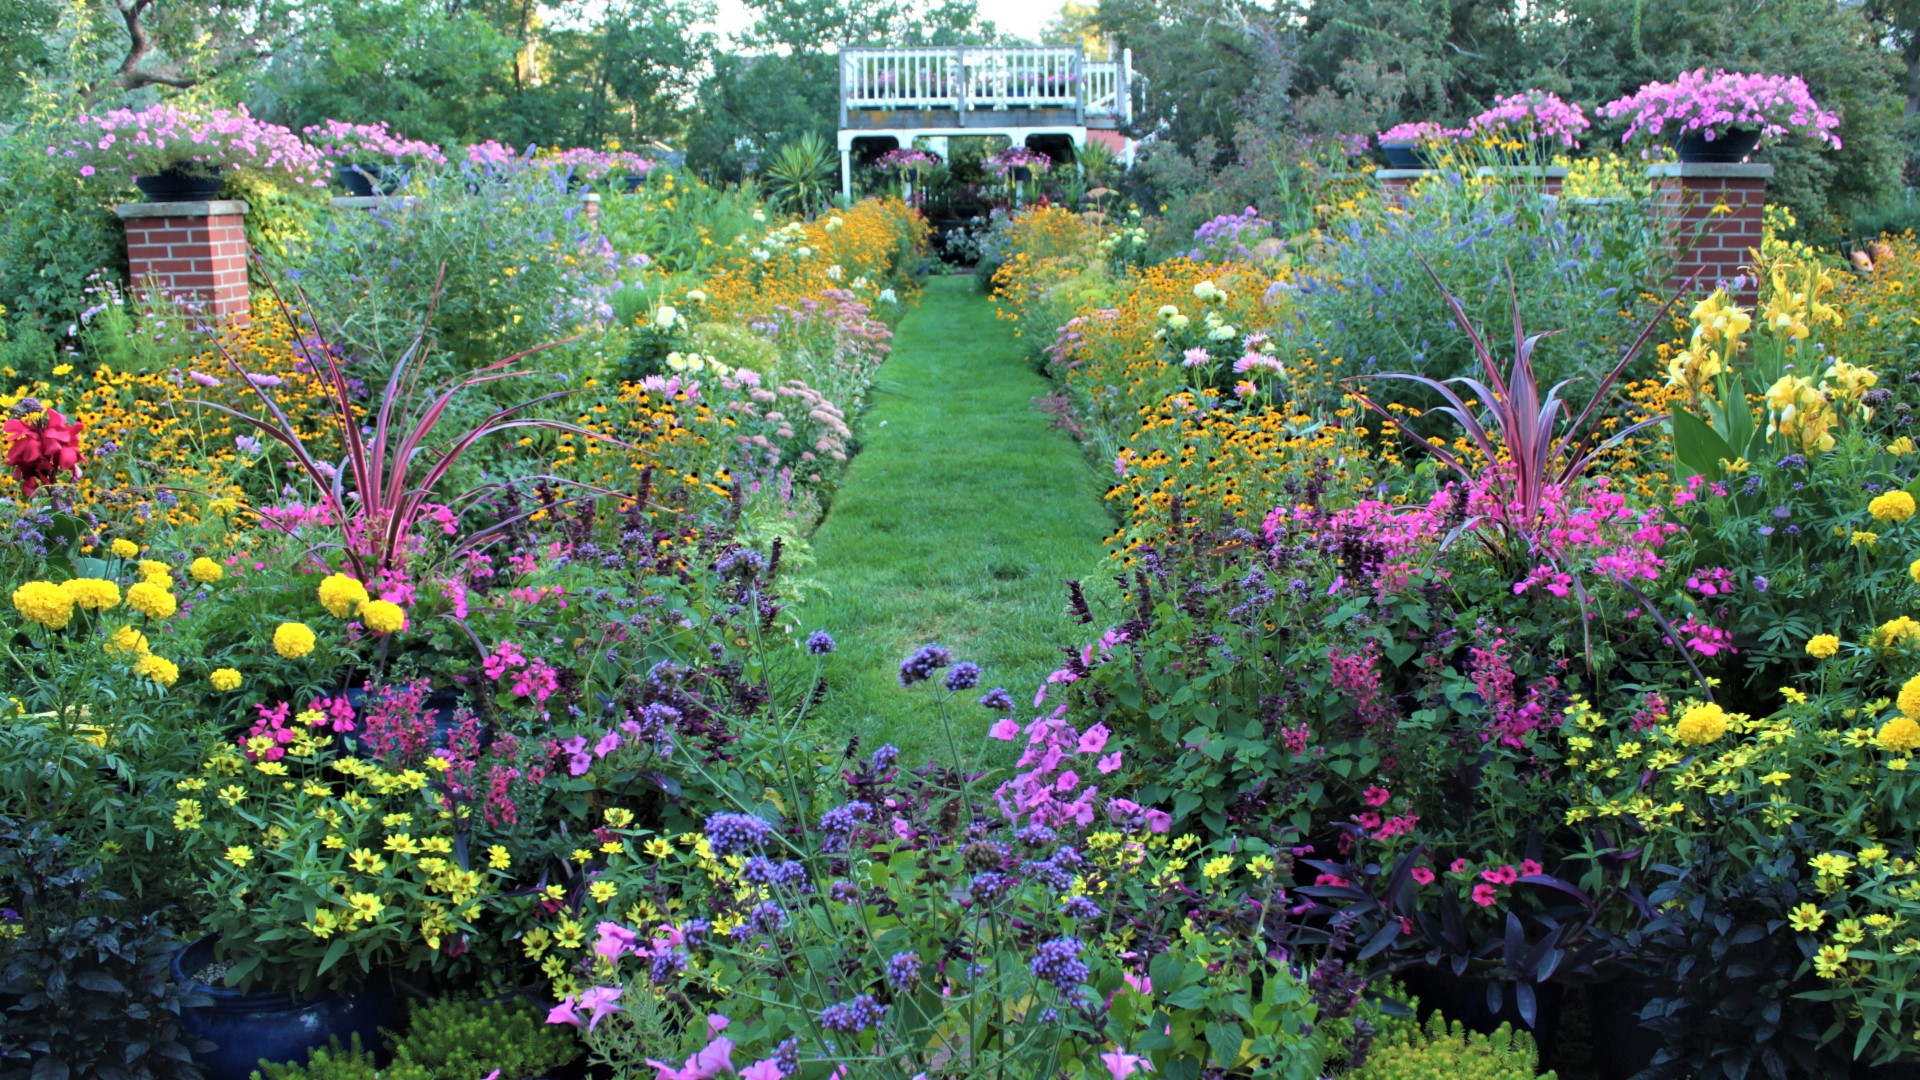 It takes planning and execution to keep your garden colorful all season long.